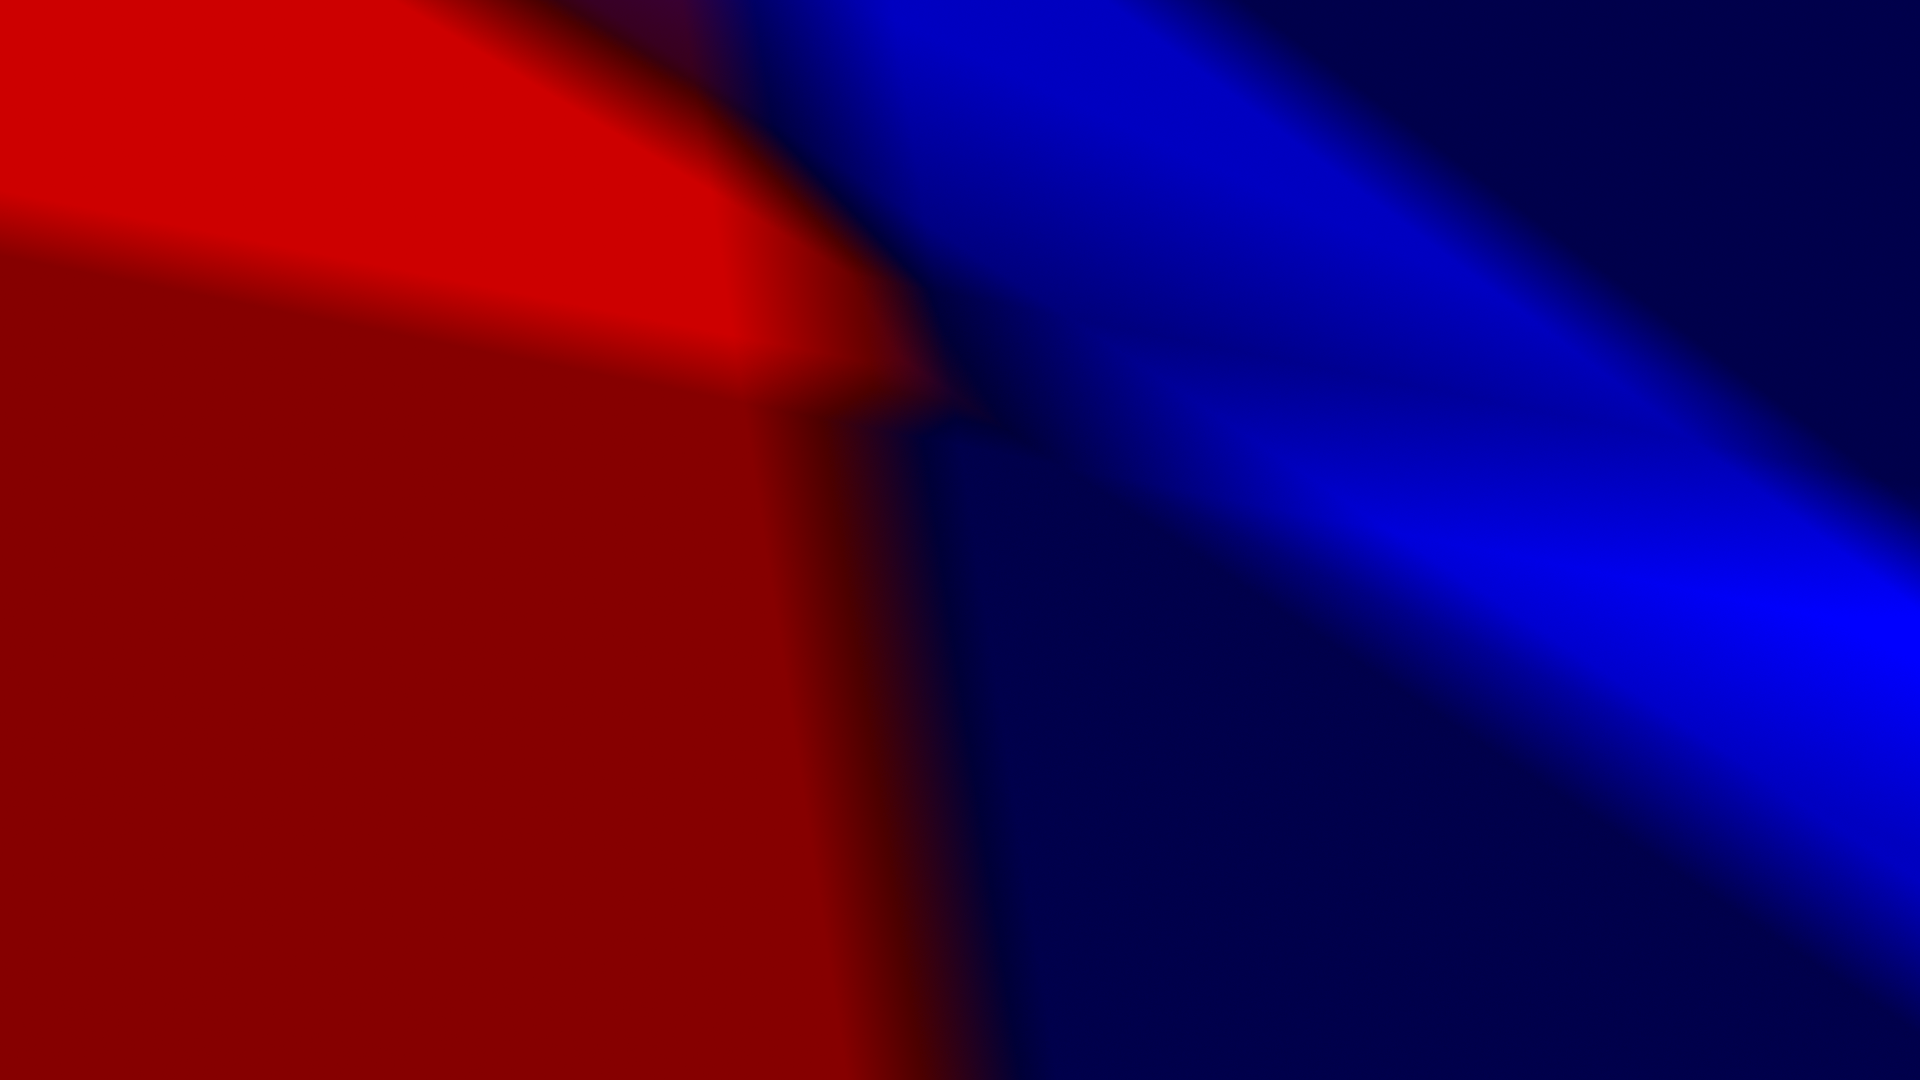 General 1920x1080 red blue gradient texture